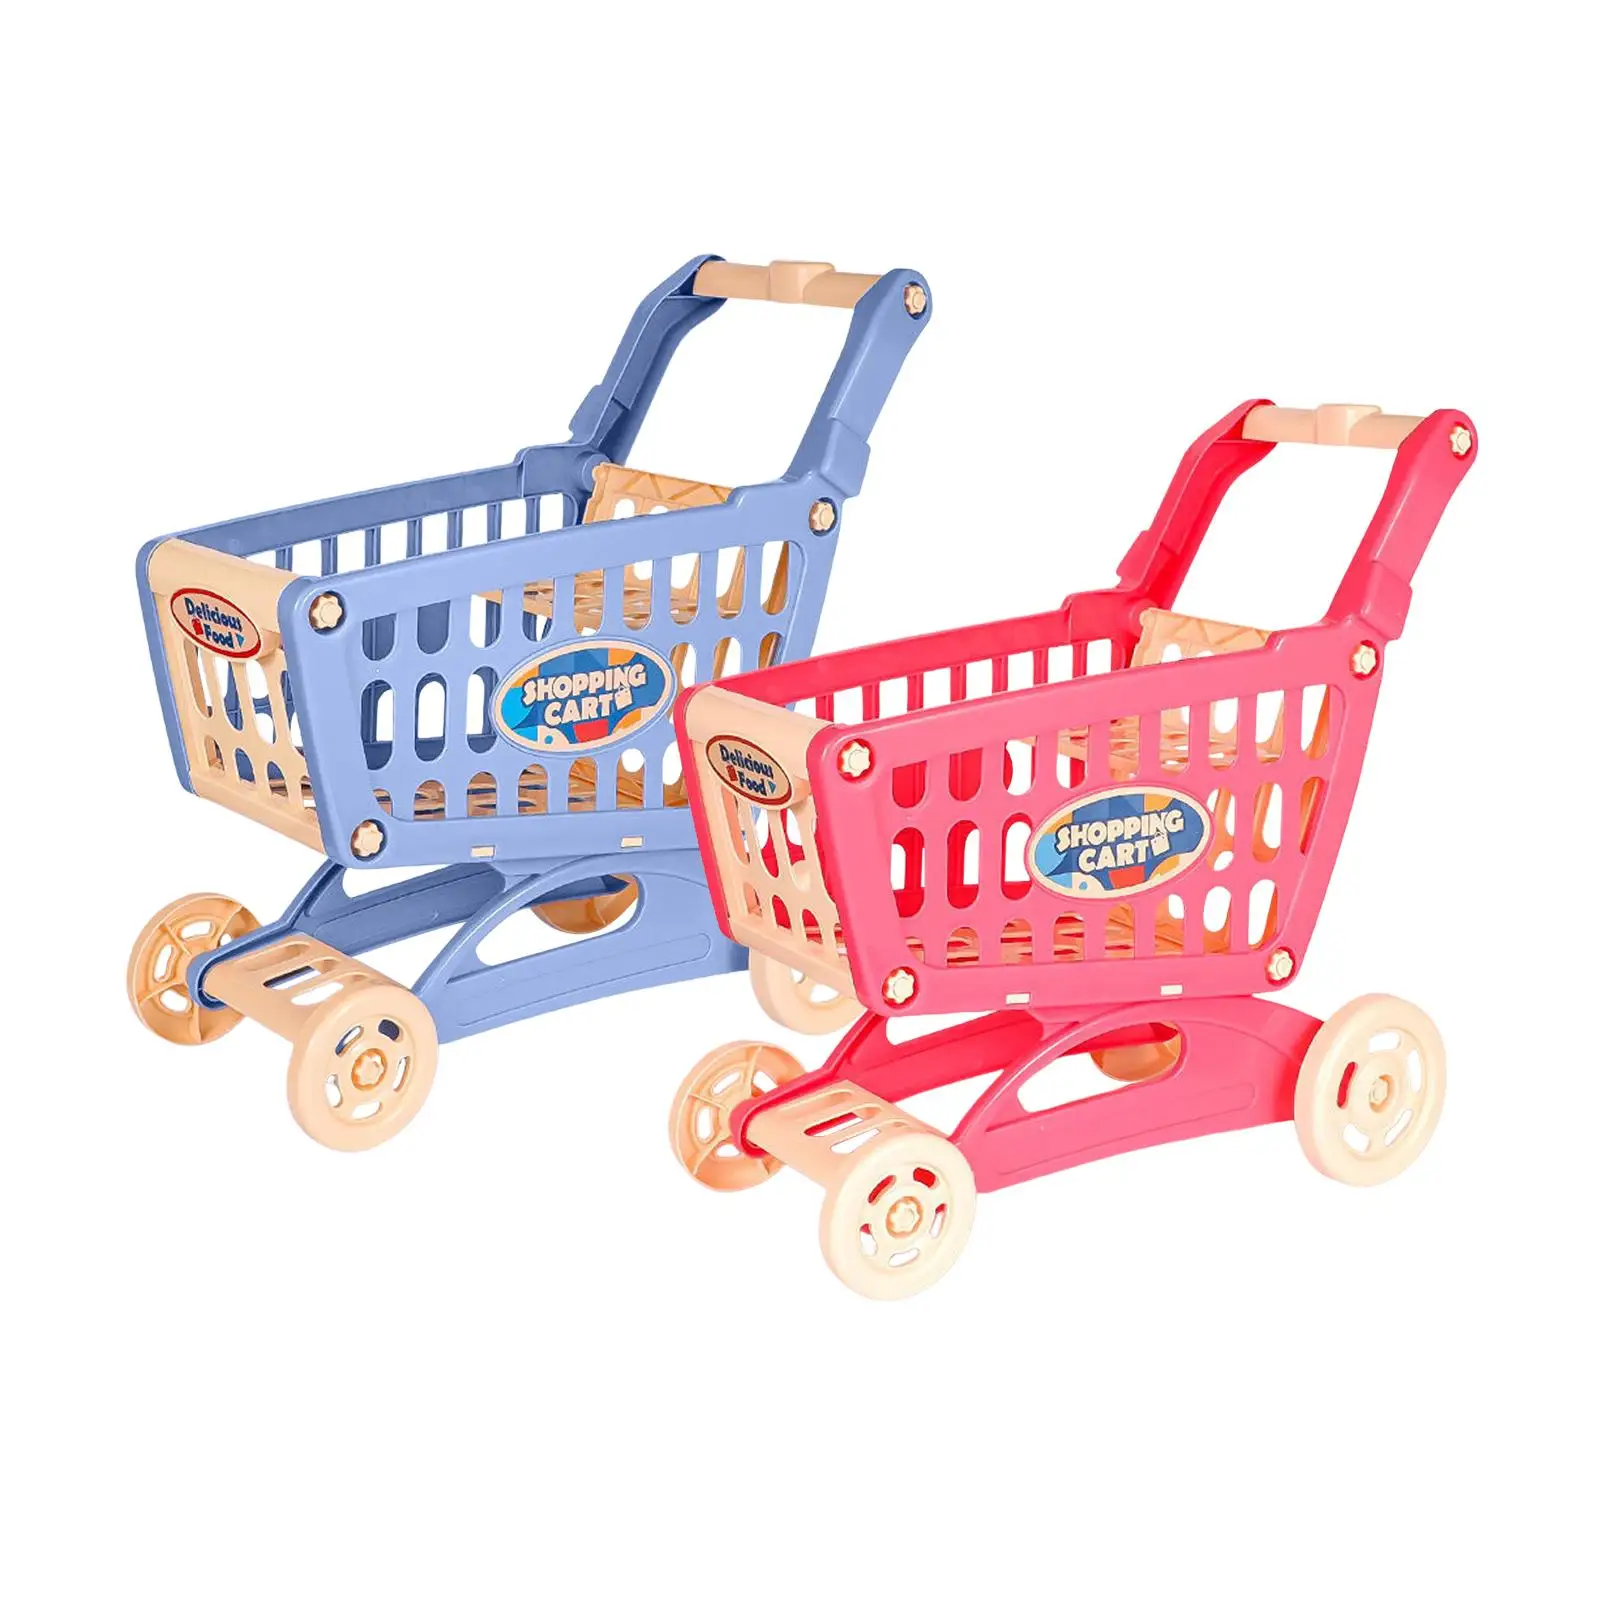 Mart Shopping Cart Shop Grocery Cart Storage Toy Children`s Shopping Cart Toys for Girls and Boys Birthday Gift Creative Toys